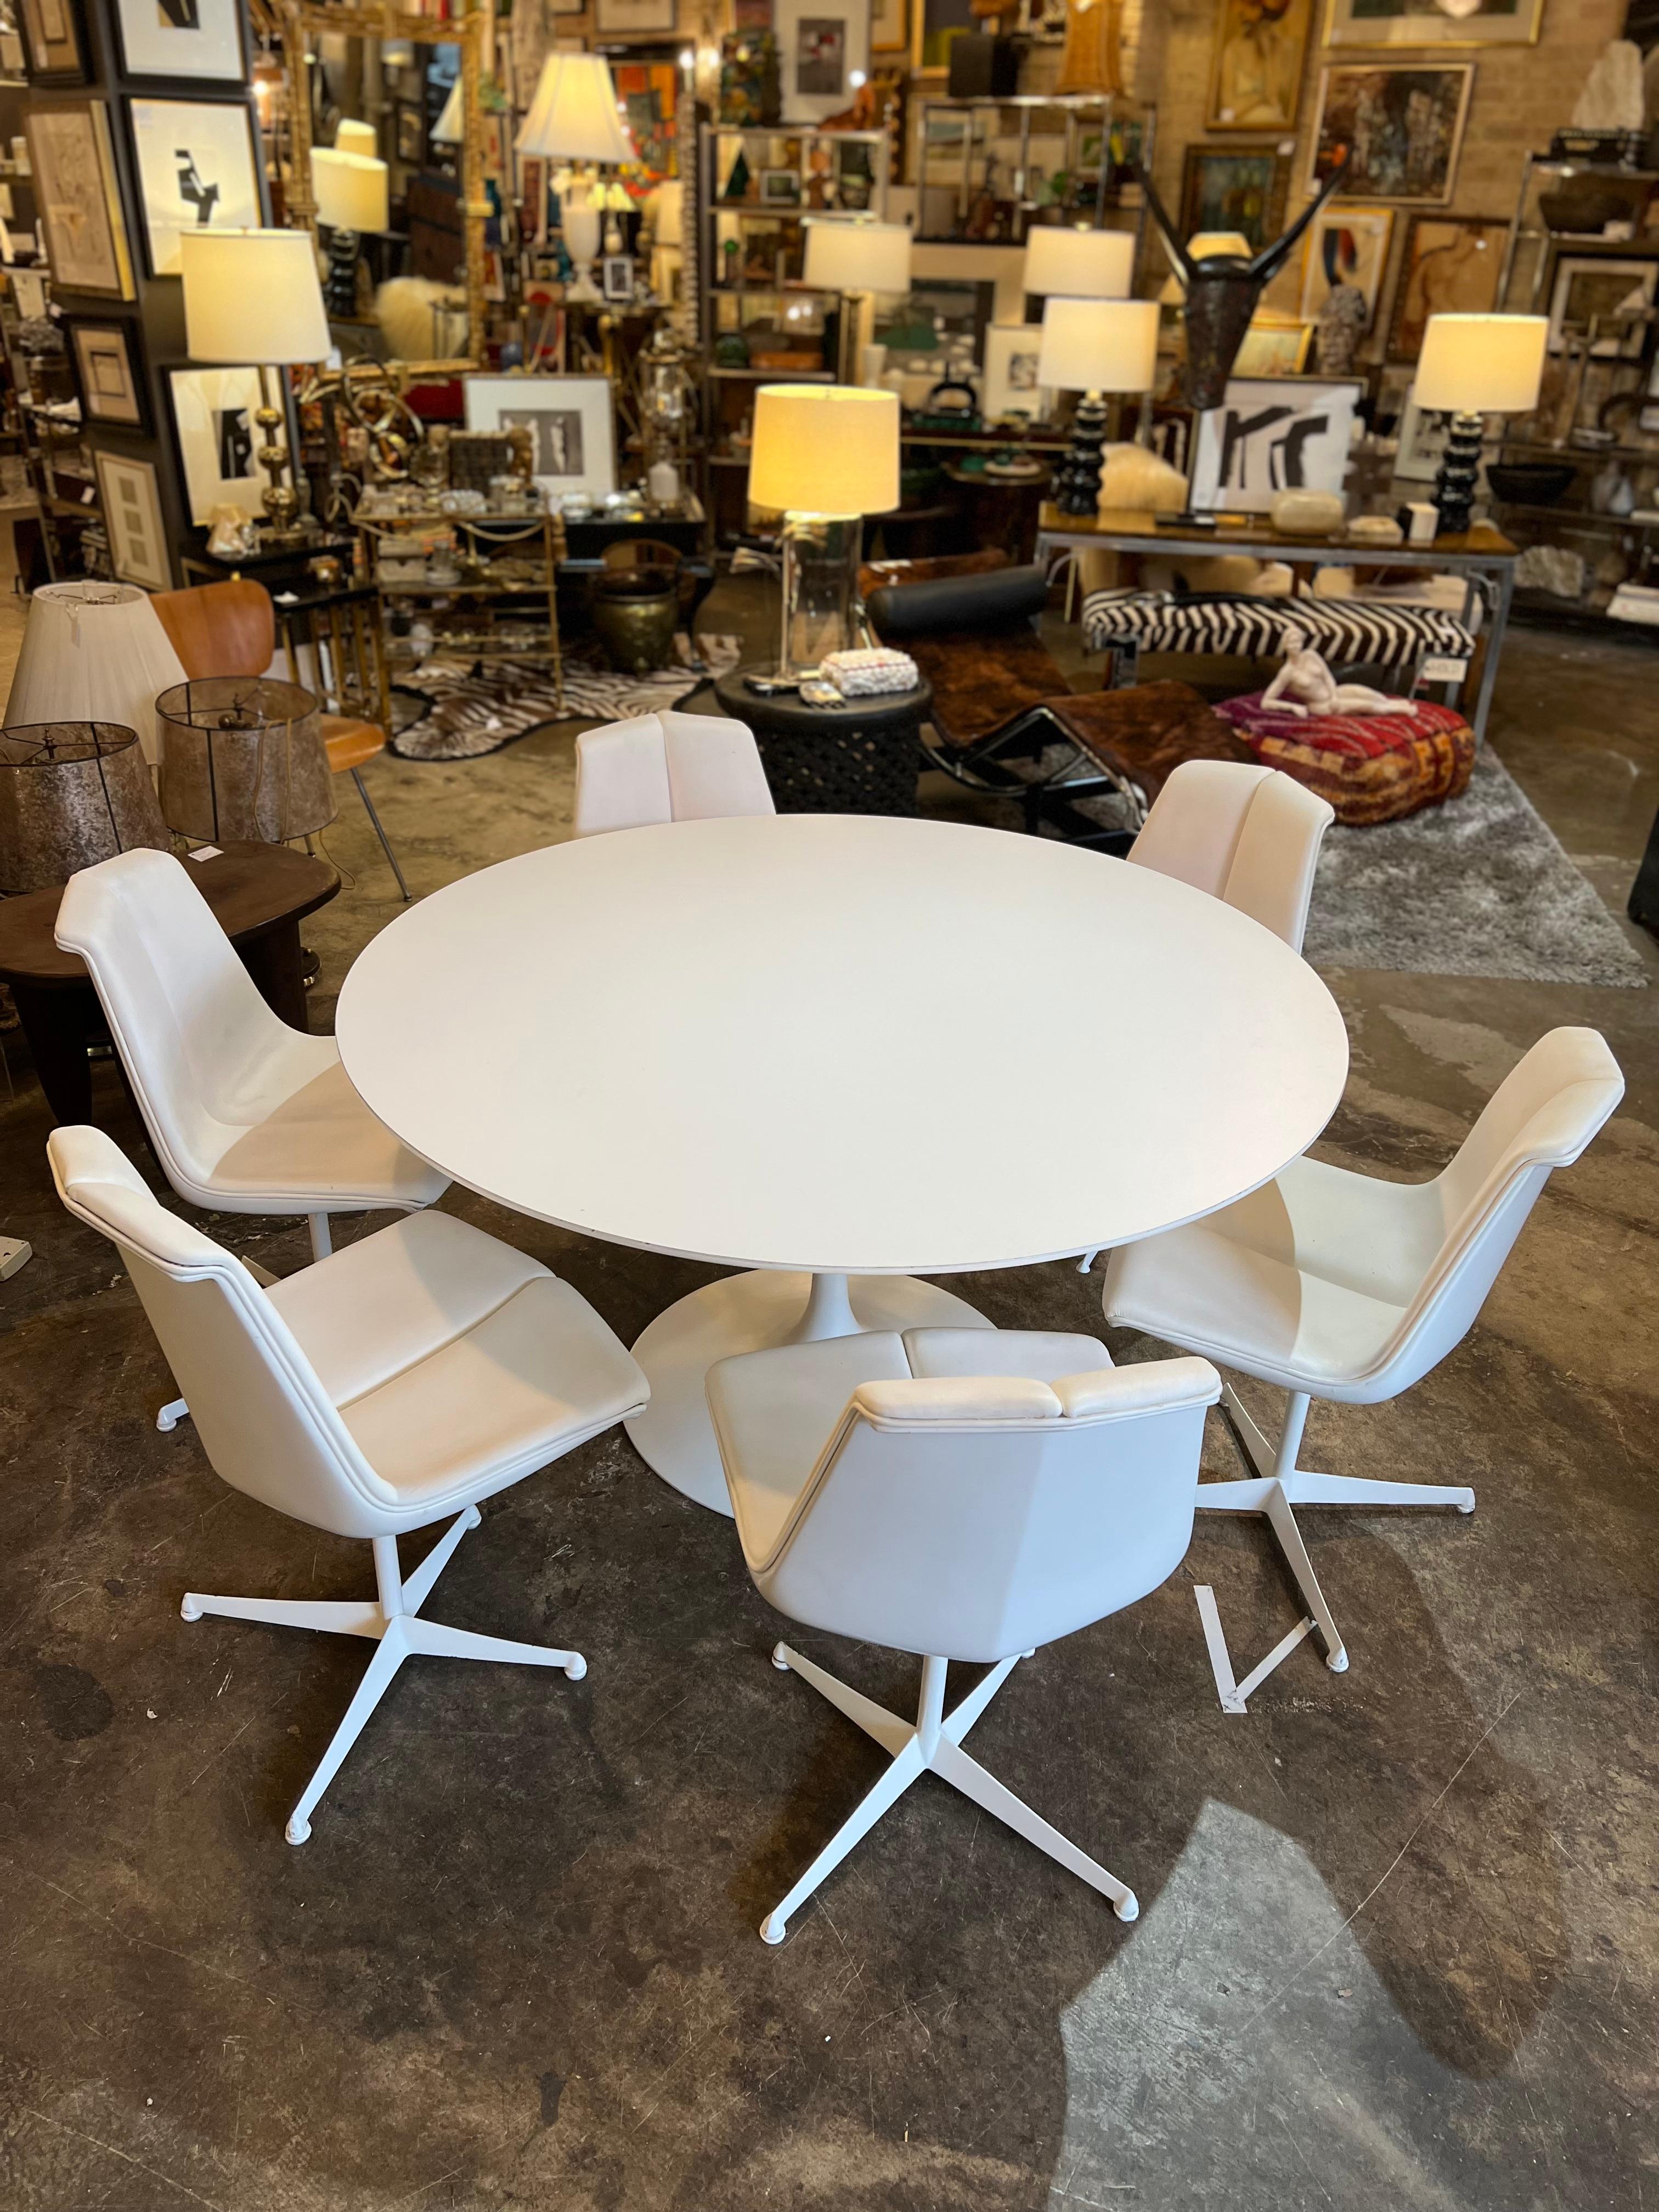 A beautiful original example of a 1960s Saarinen white round laminated Tulip Table together with Richard Schultz 1966 